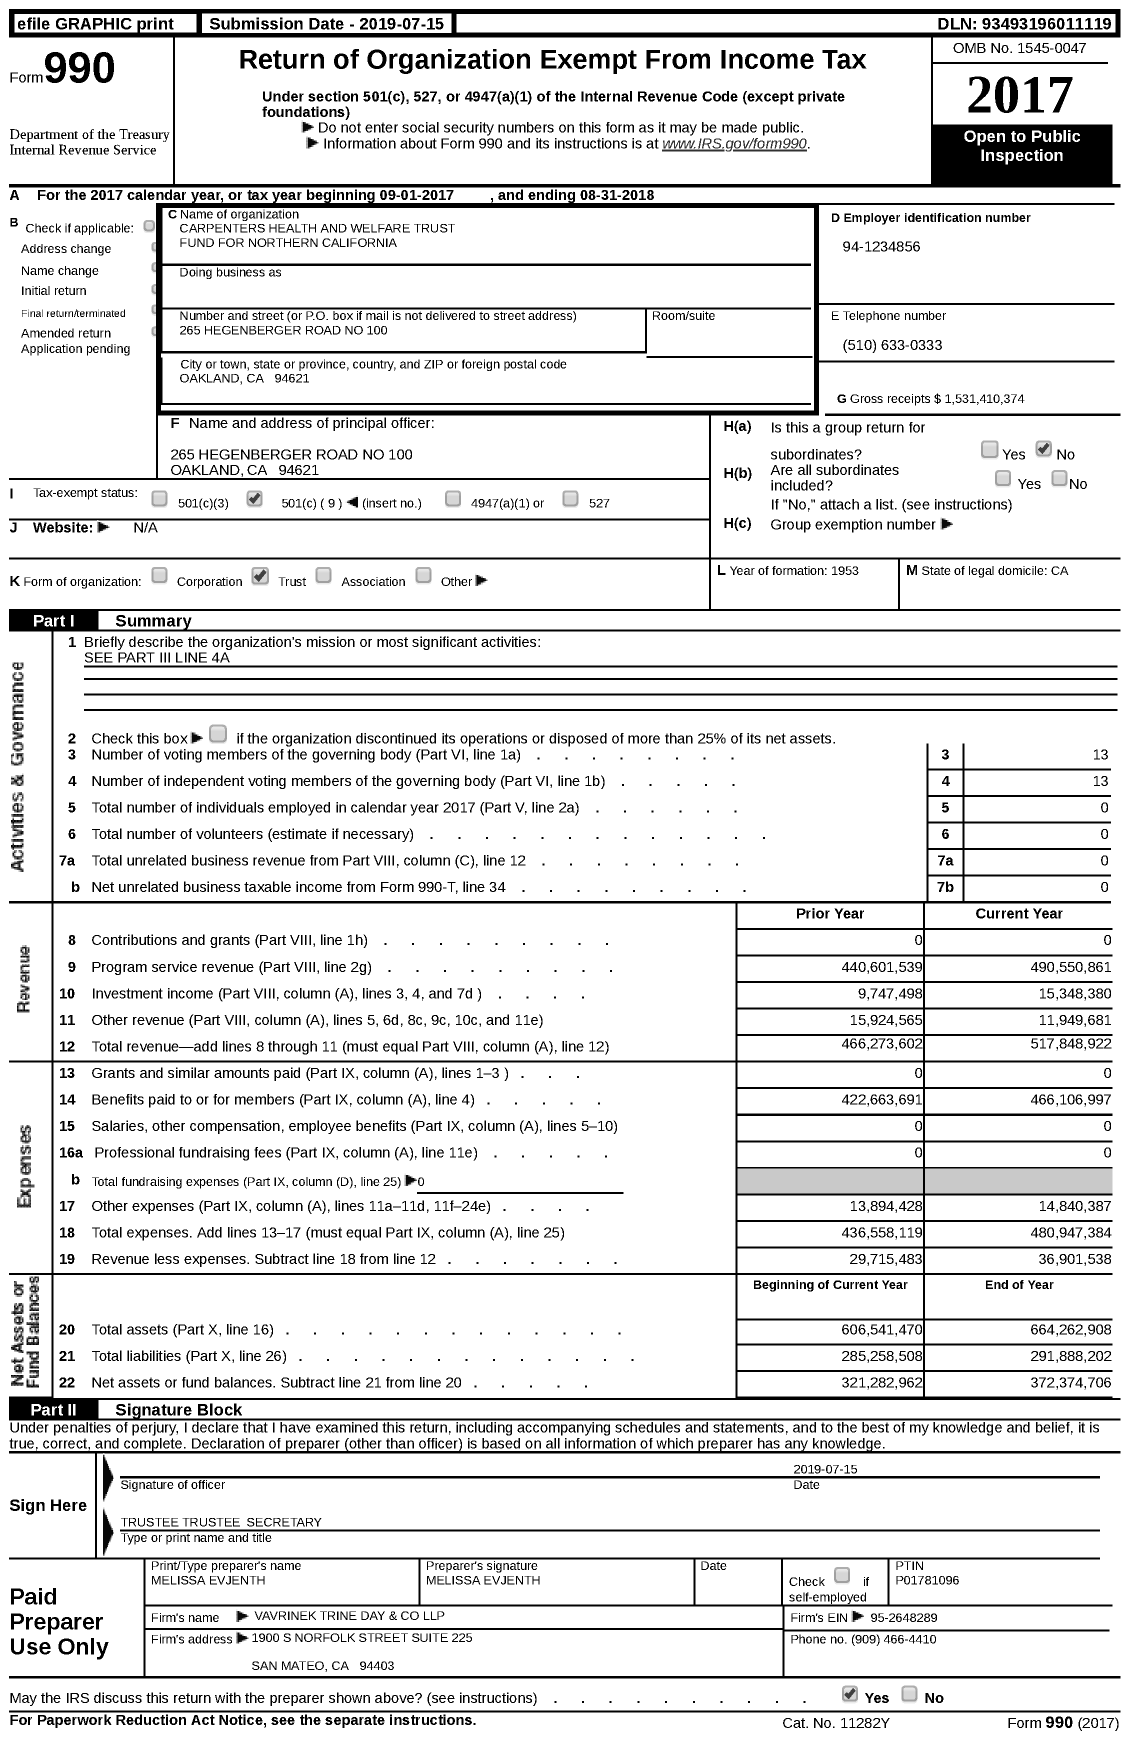 Image of first page of 2017 Form 990 for Carpenters Health and Welfare Trust Fund for Northern California